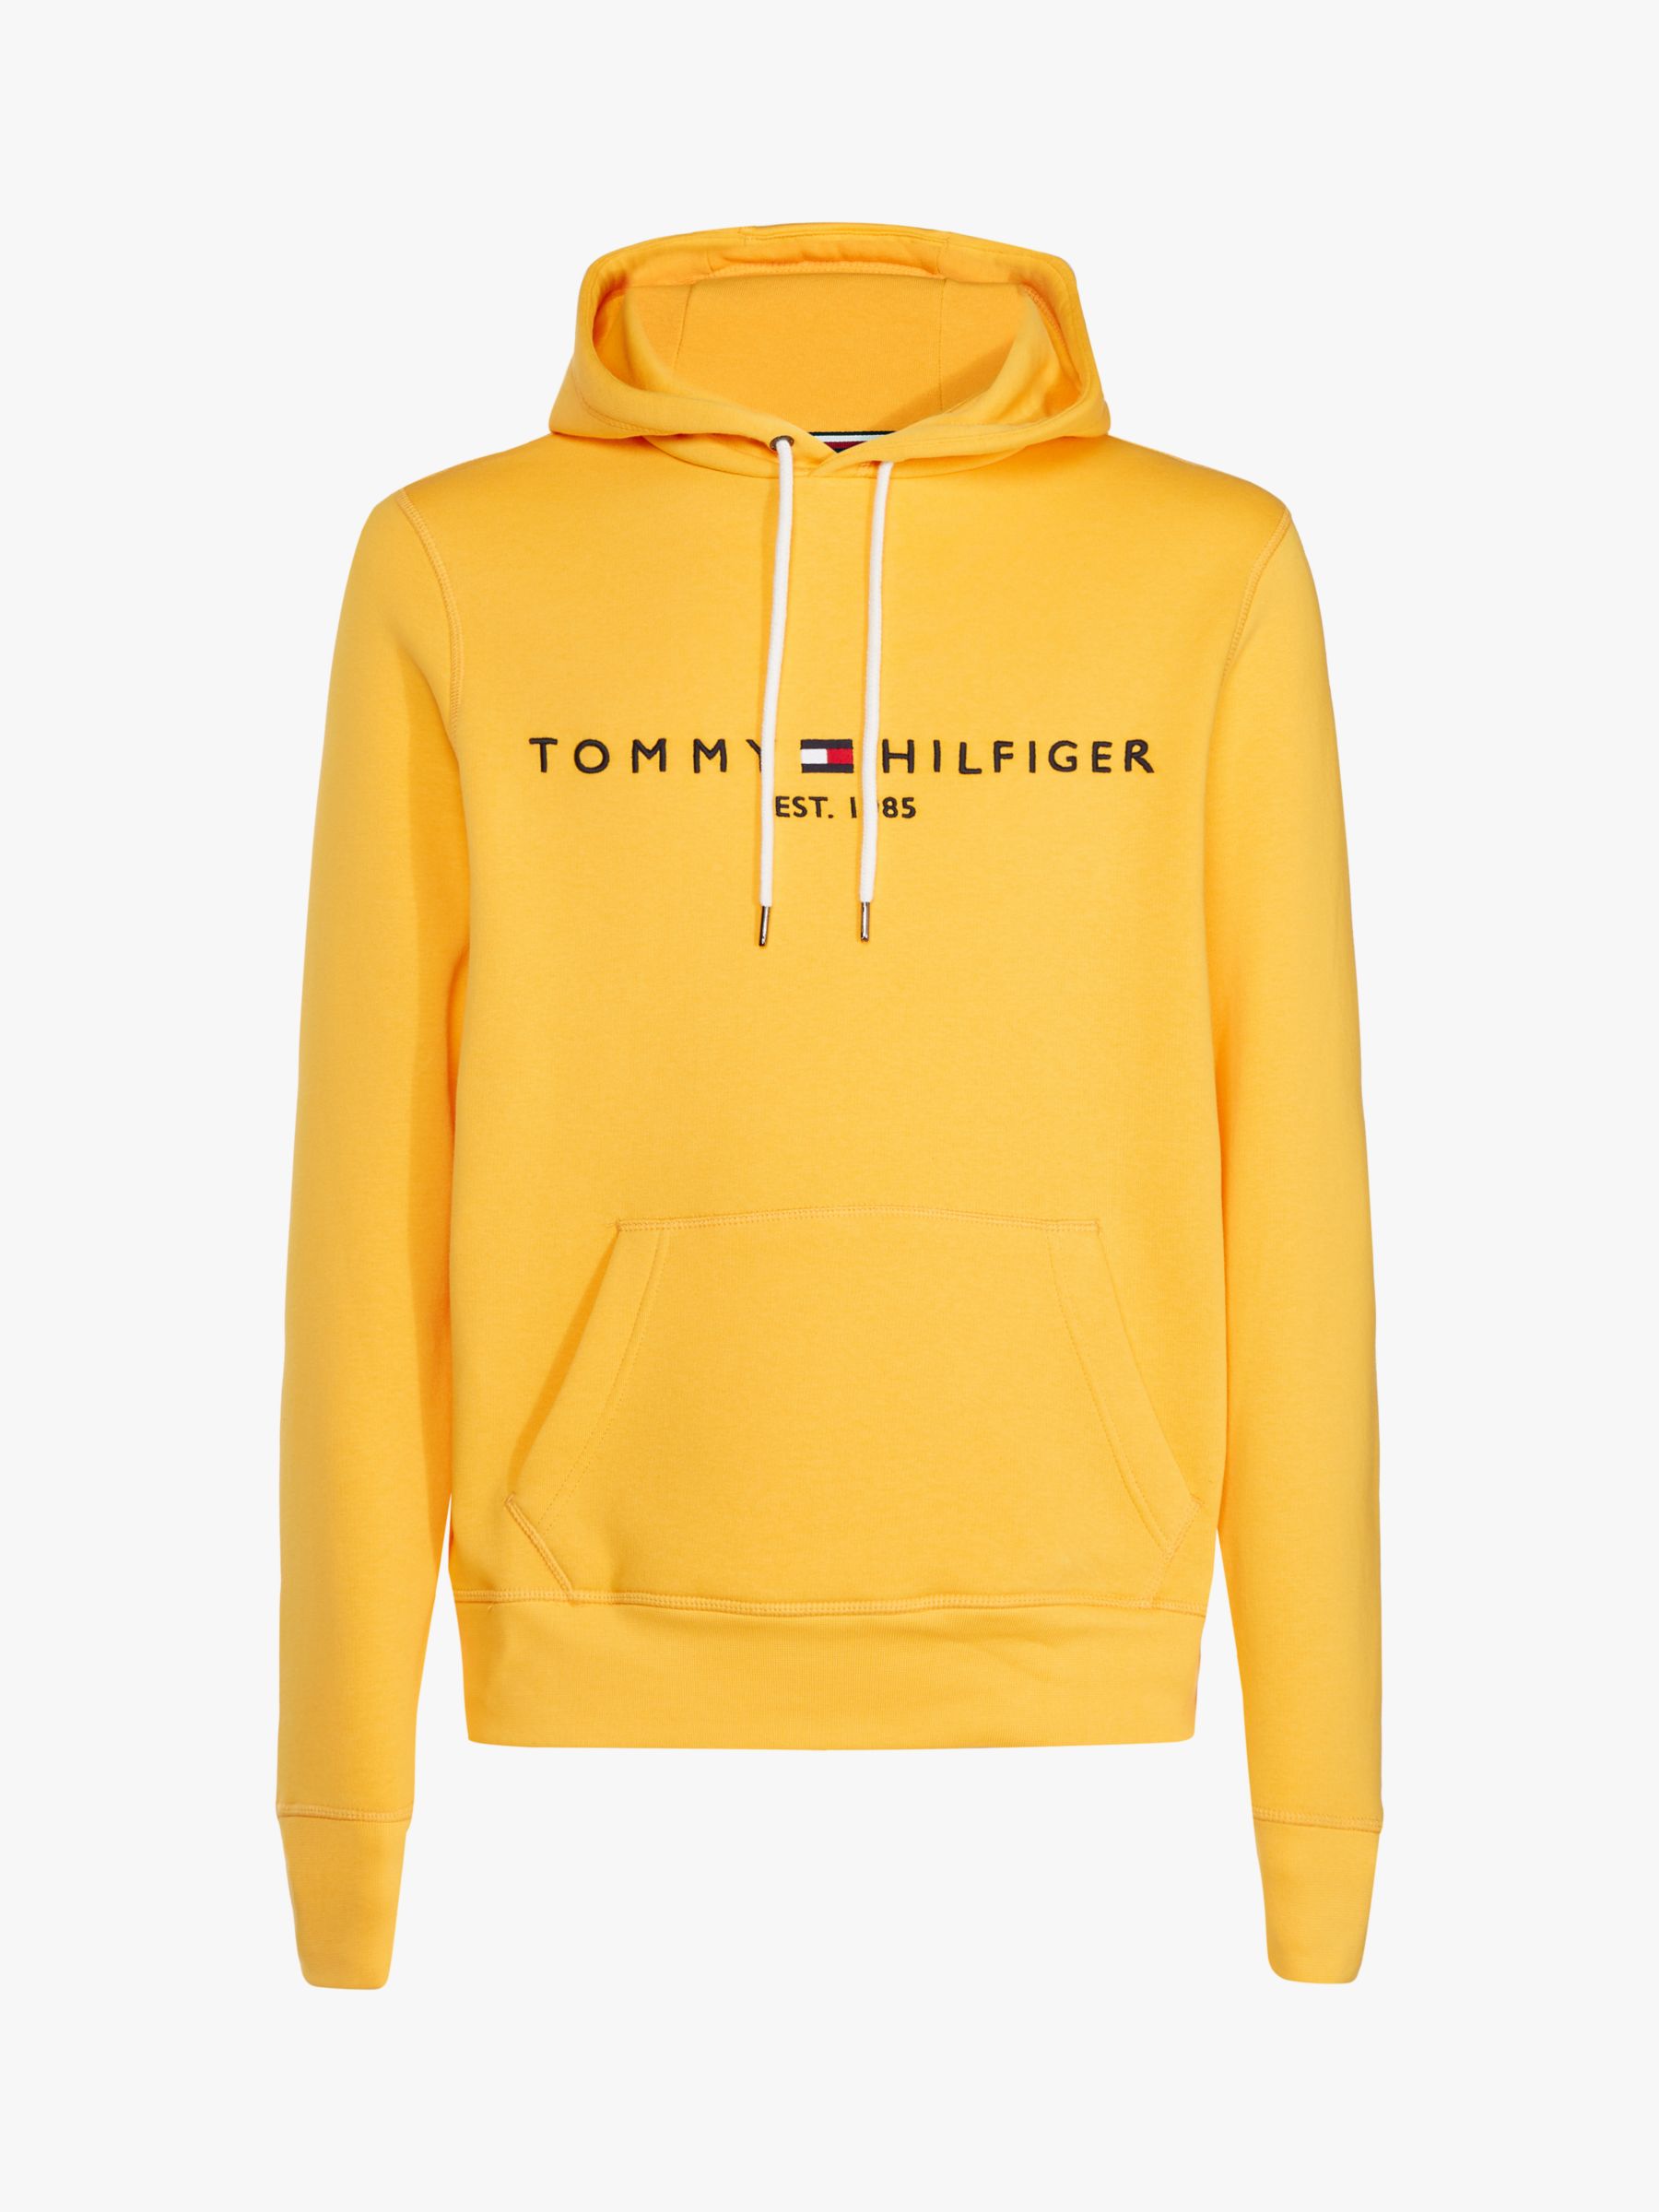 tommy hilfiger hoodie yellow